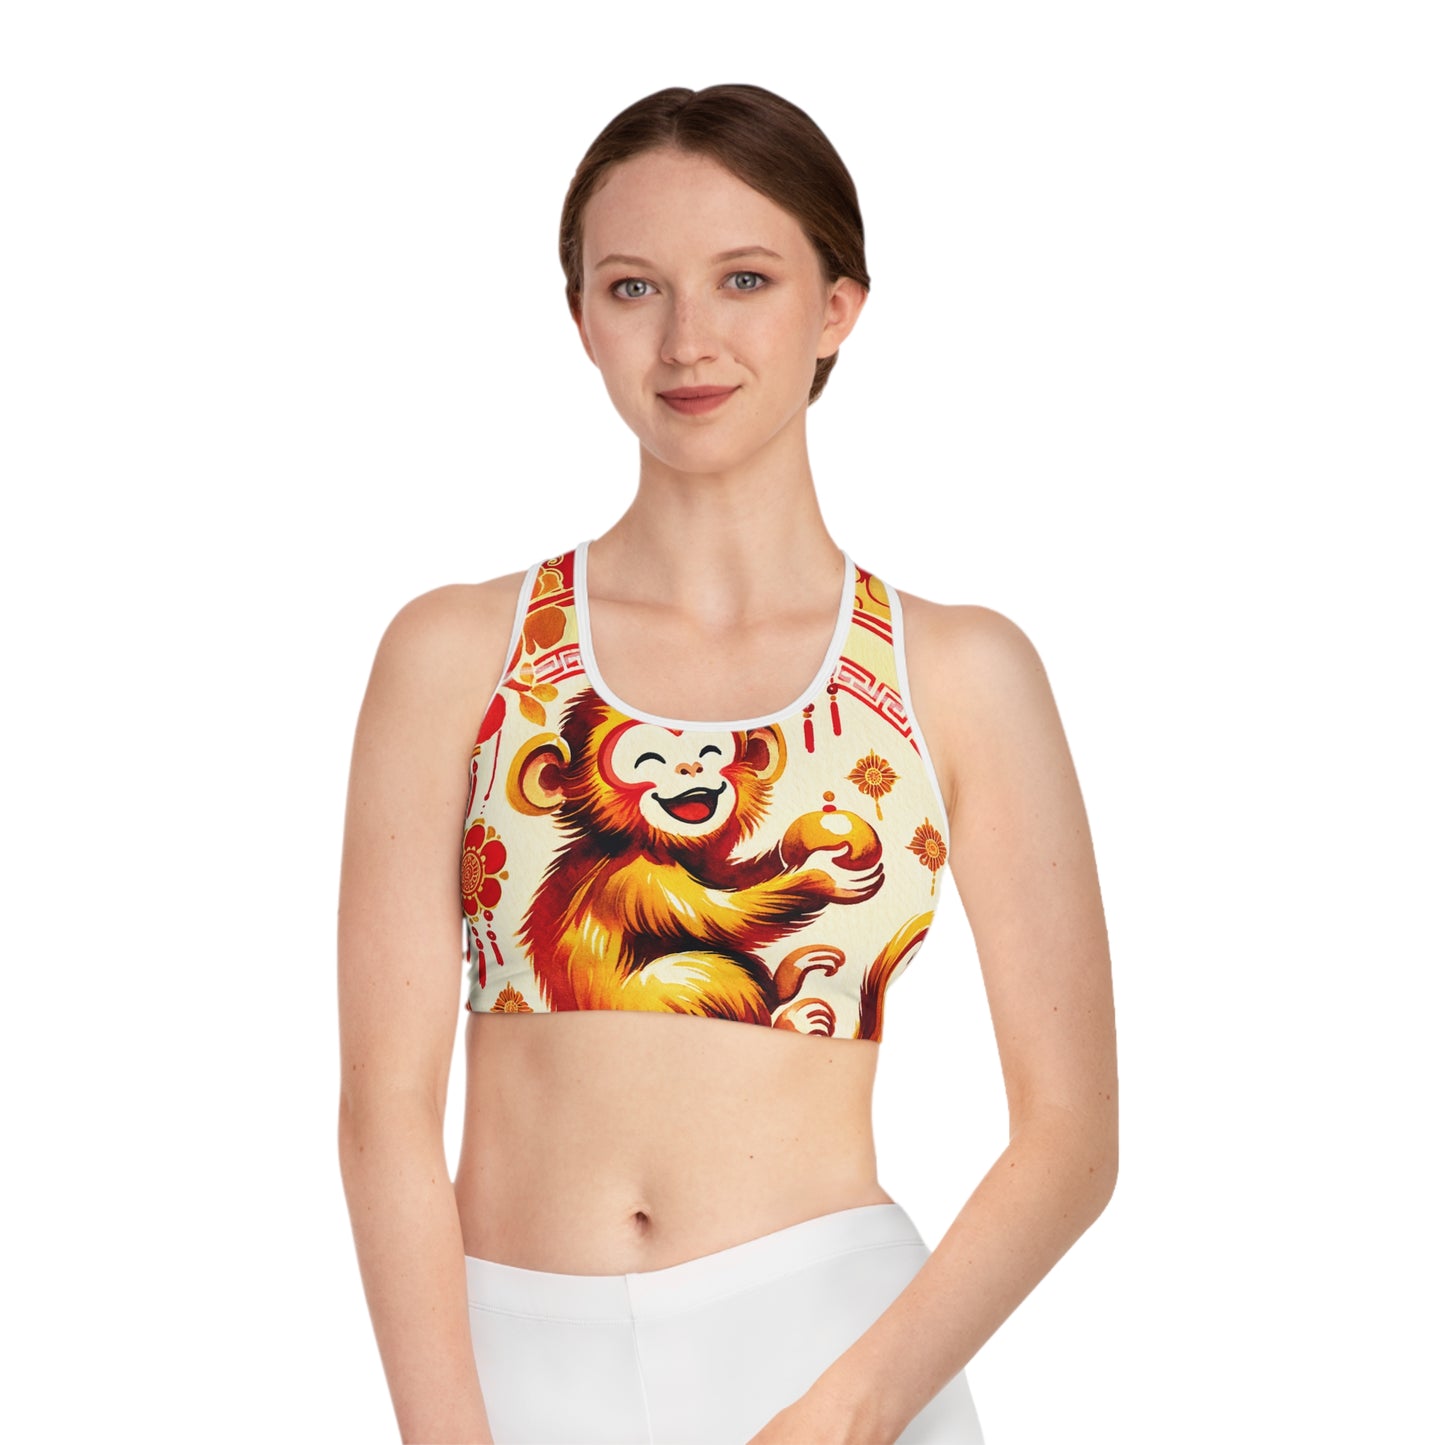 "Golden Simian Serenity in Scarlet Radiance" - High Performance Sports Bra